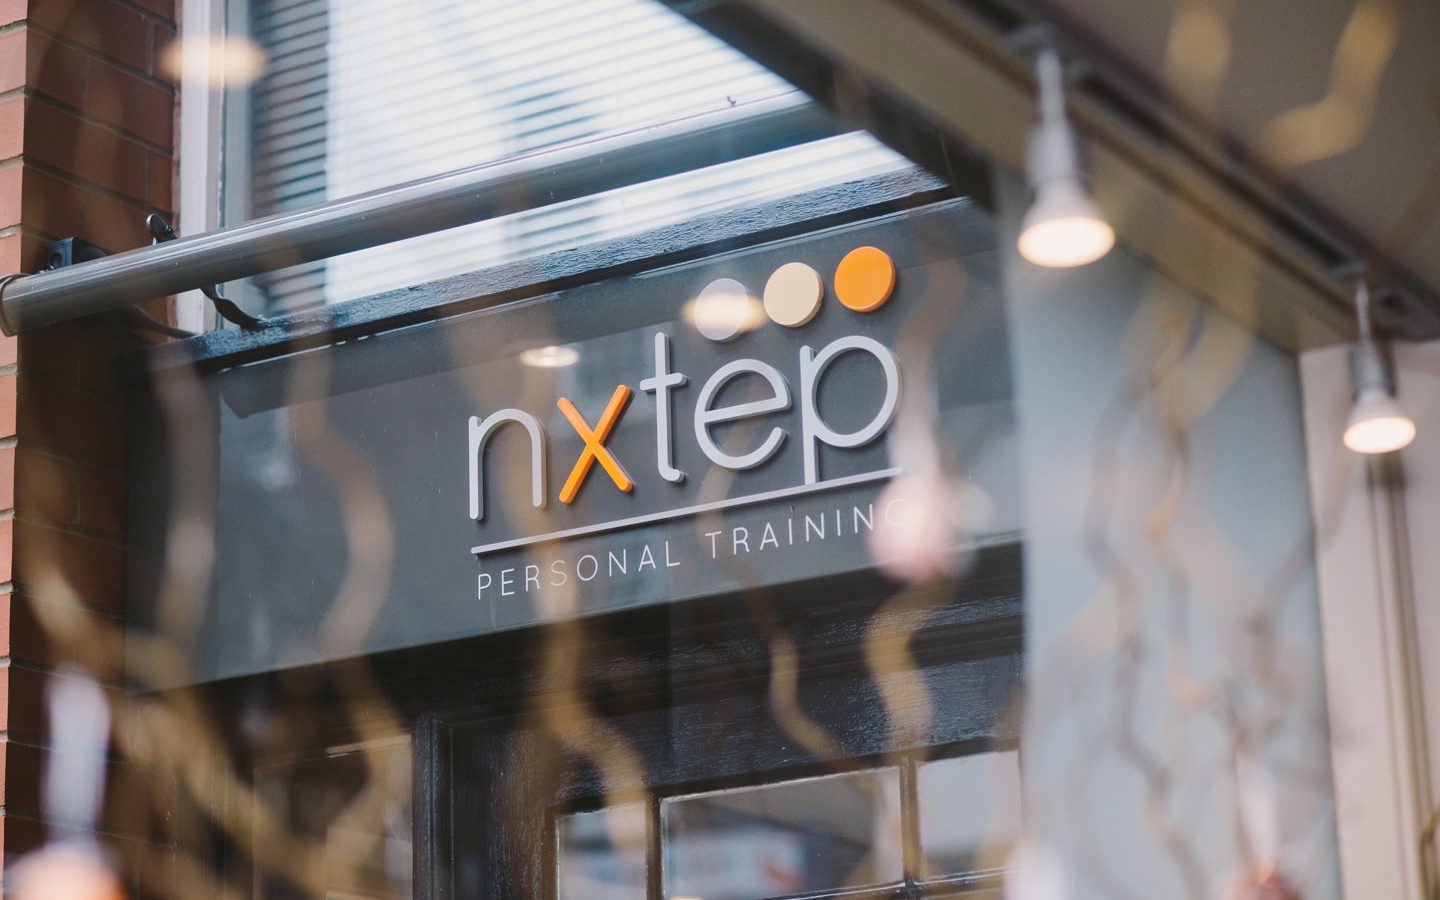 Personal Training Gym Nxtep Takes Personal Fitness to the Next Level